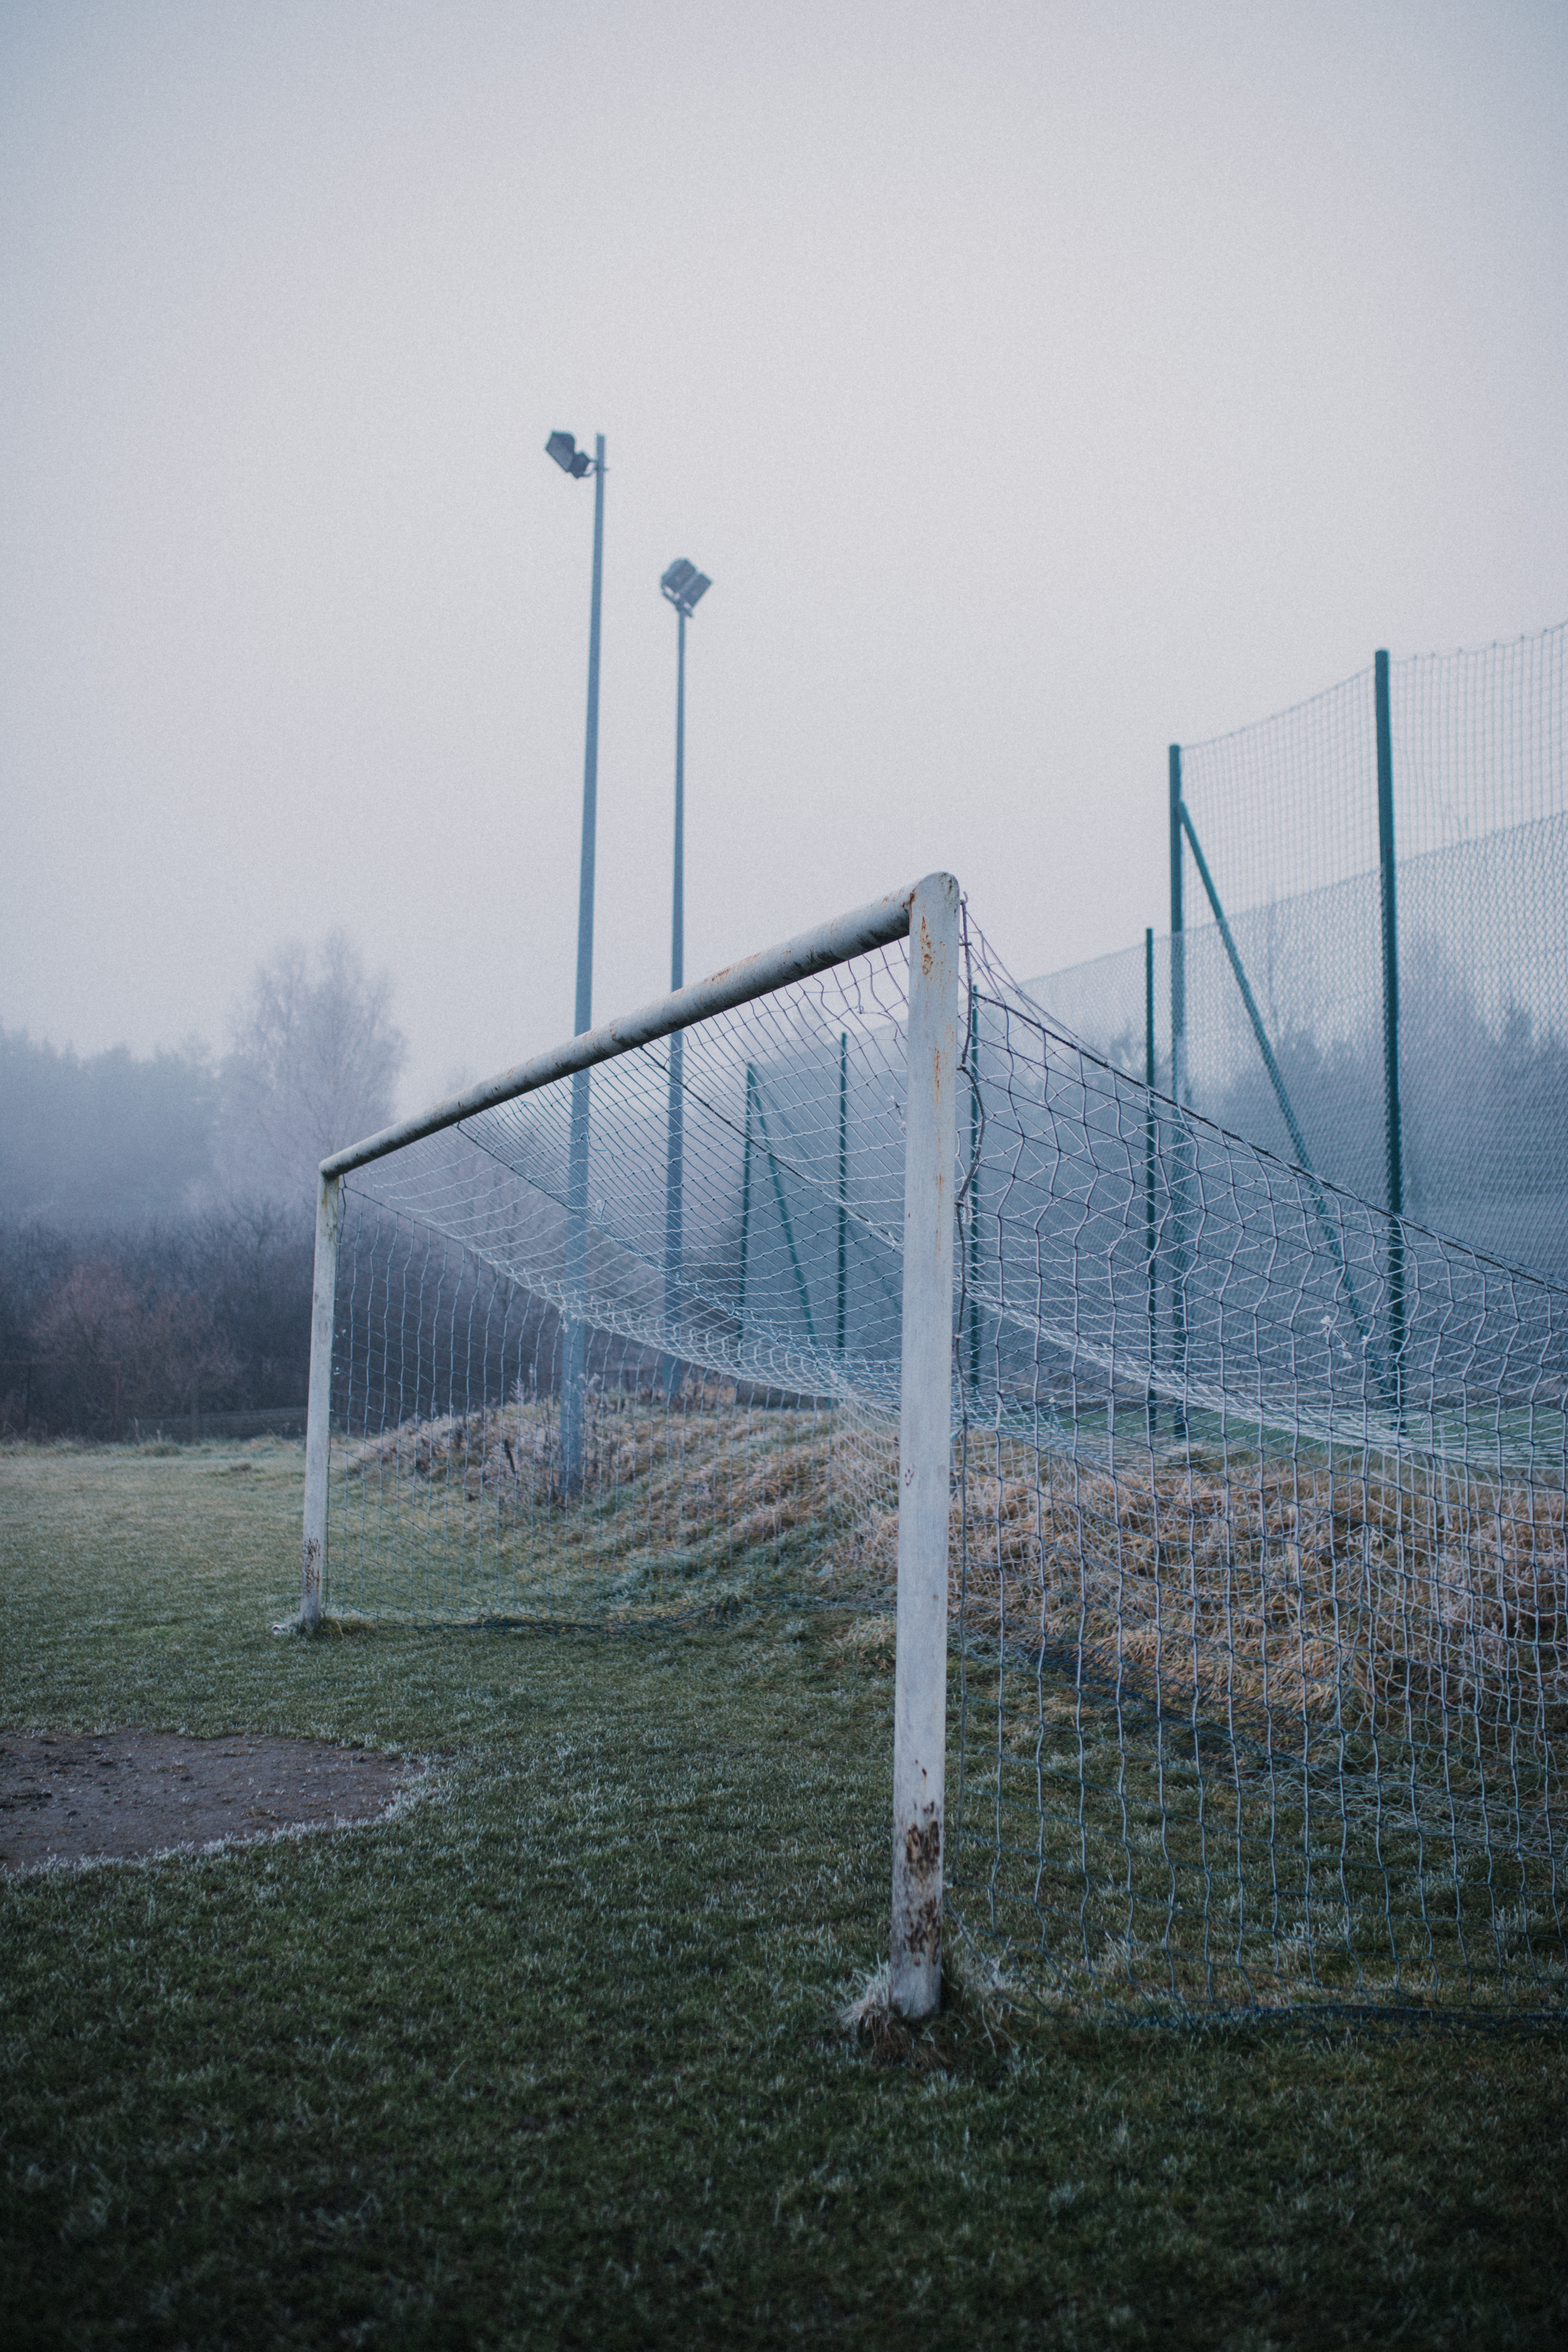 Soccer Goal on Grass Field on a Foggy Day · Free